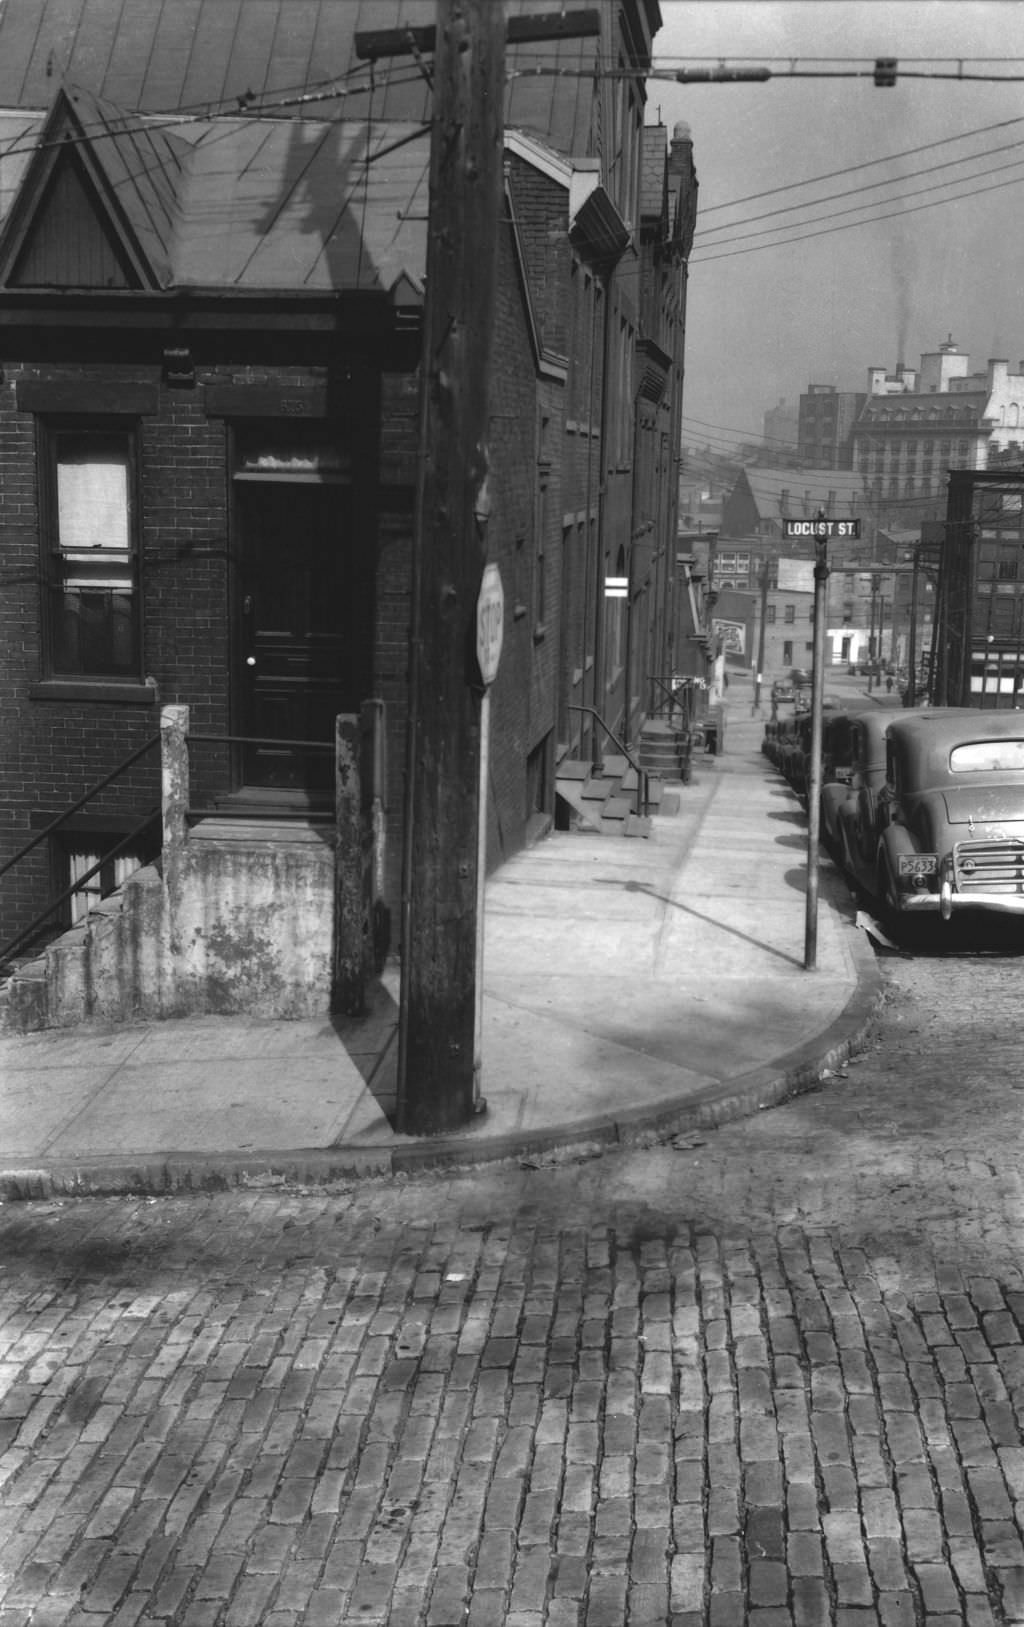 Looking north down Boyd Street to the Locust Street intersection, 1940